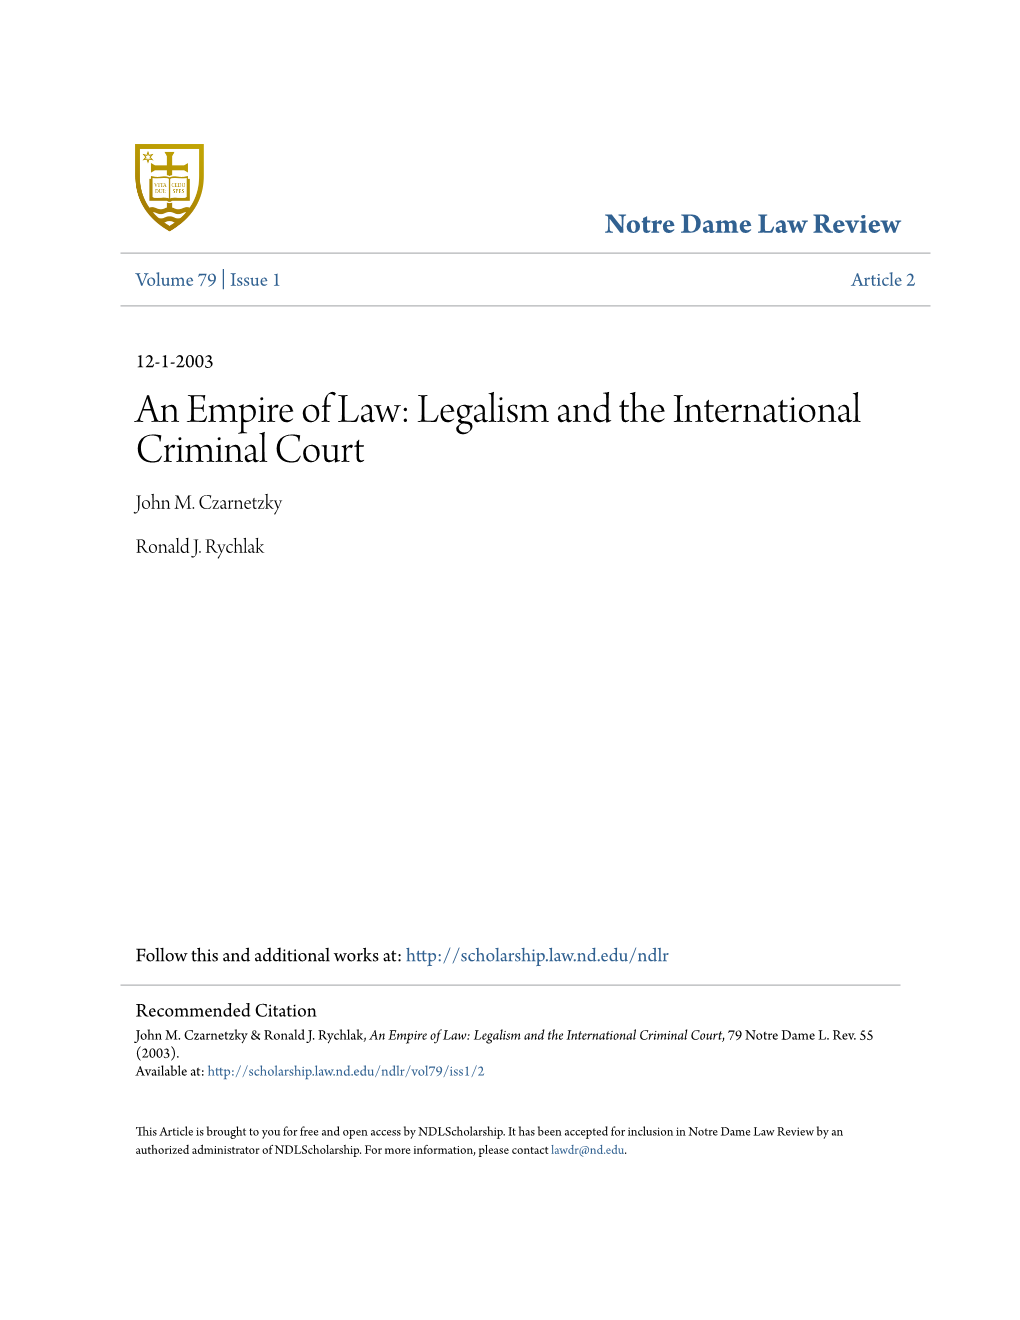 An Empire of Law: Legalism and the International Criminal Court John M